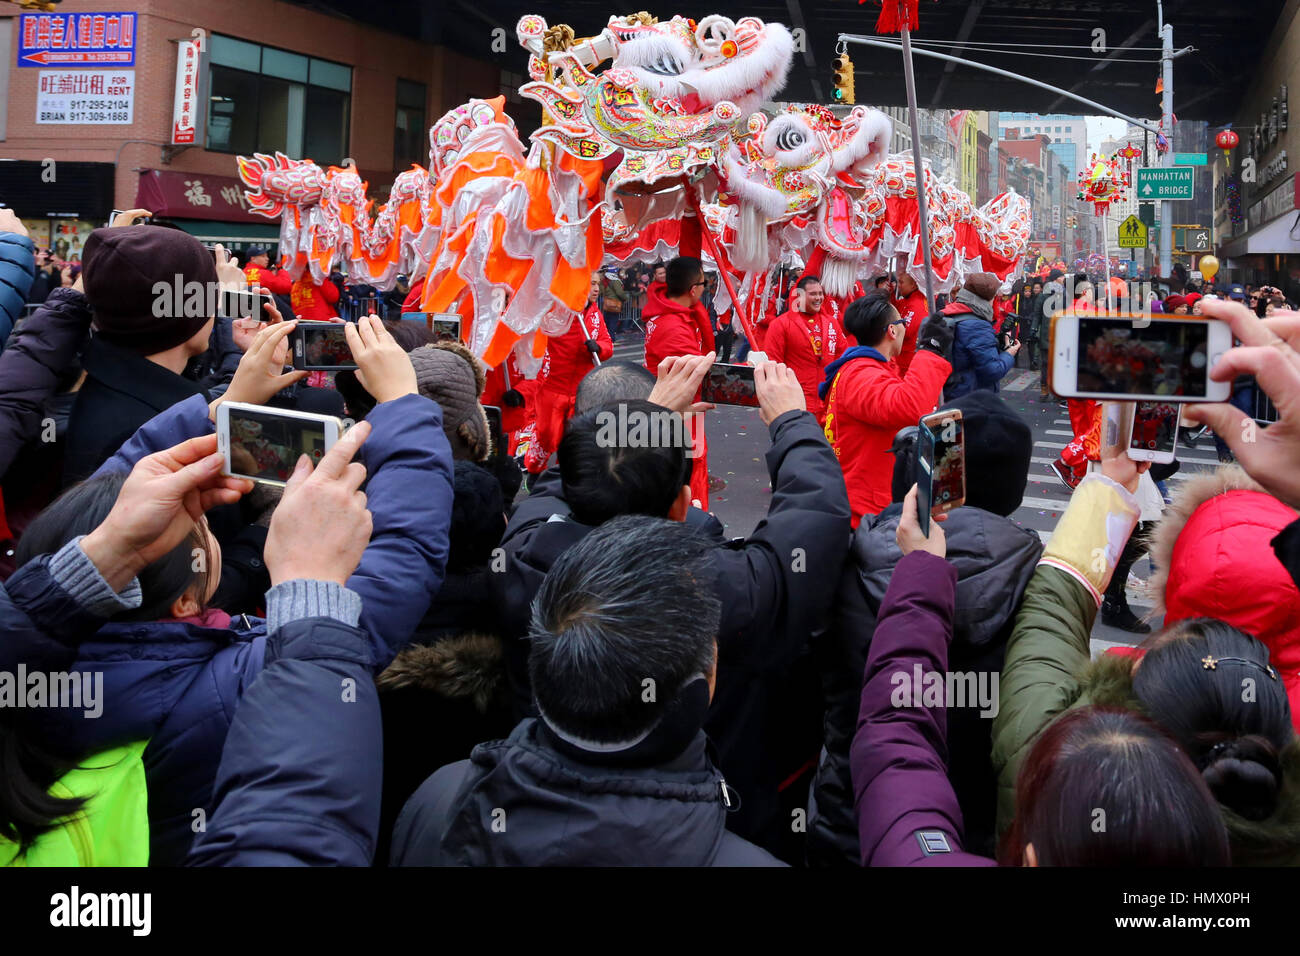 New York, USA. 05th Feb, 2017. New York Chinatown celebrating the Lunar New Year, Year of the Rooster with Lion Dances, Dragon dances, and a big parade. Credit: Robert K. Chin/Pacific Press/Alamy Live News Stock Photo